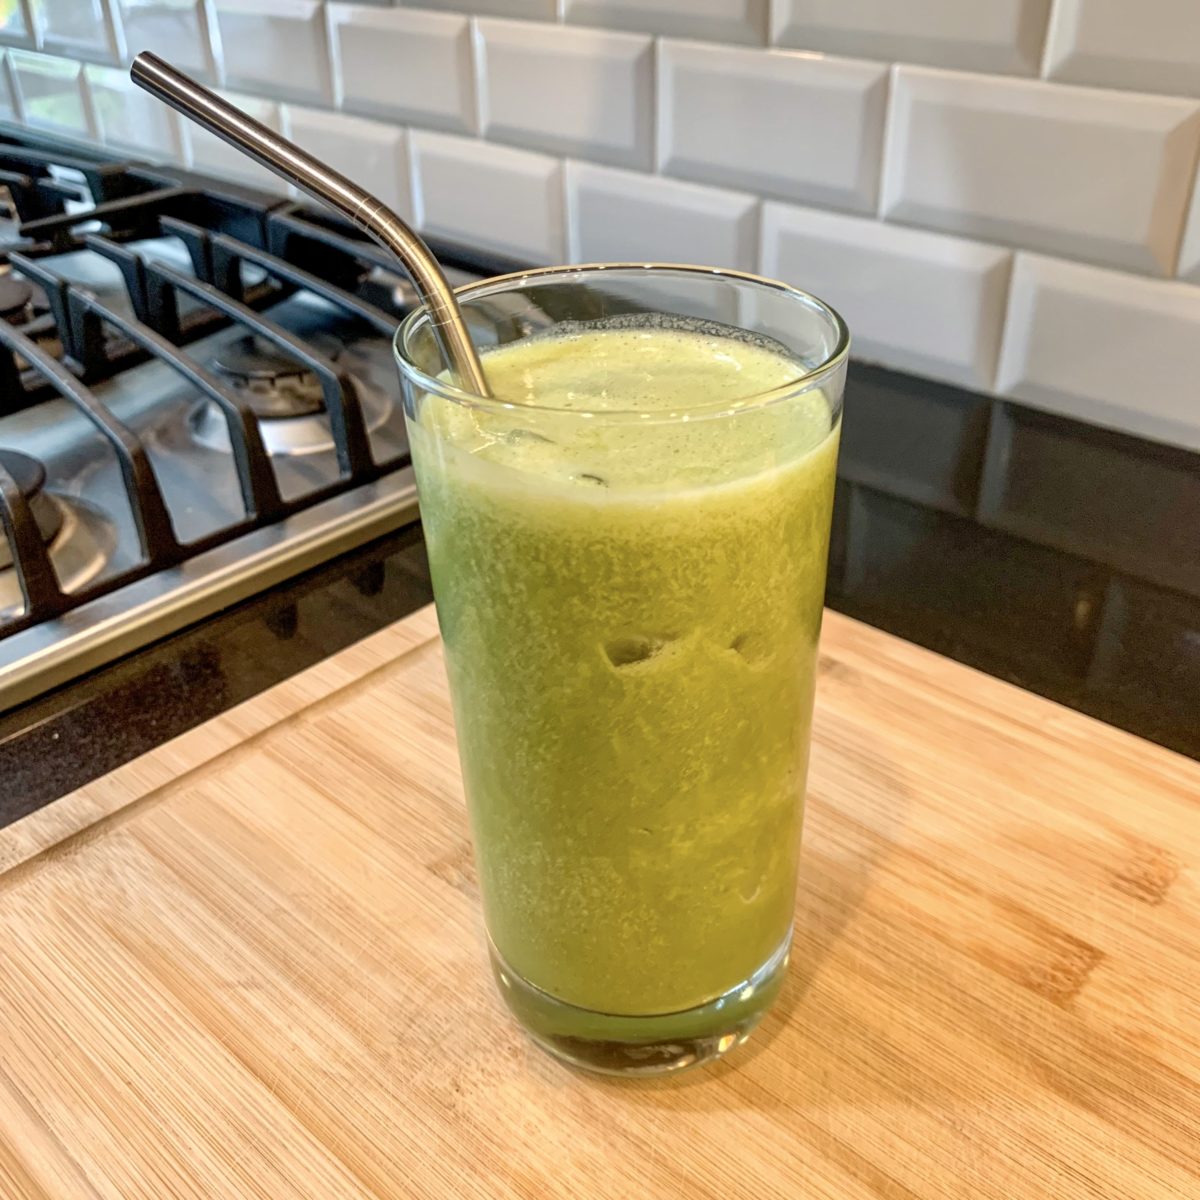 Two Smoothie Recipes Jessica Alba Drinks To Help Stay Healthy | Jessica Alba drinks these high protein smoothies before and after her workouts to help keep her energized and healthy. Below are the smoothie recipes.